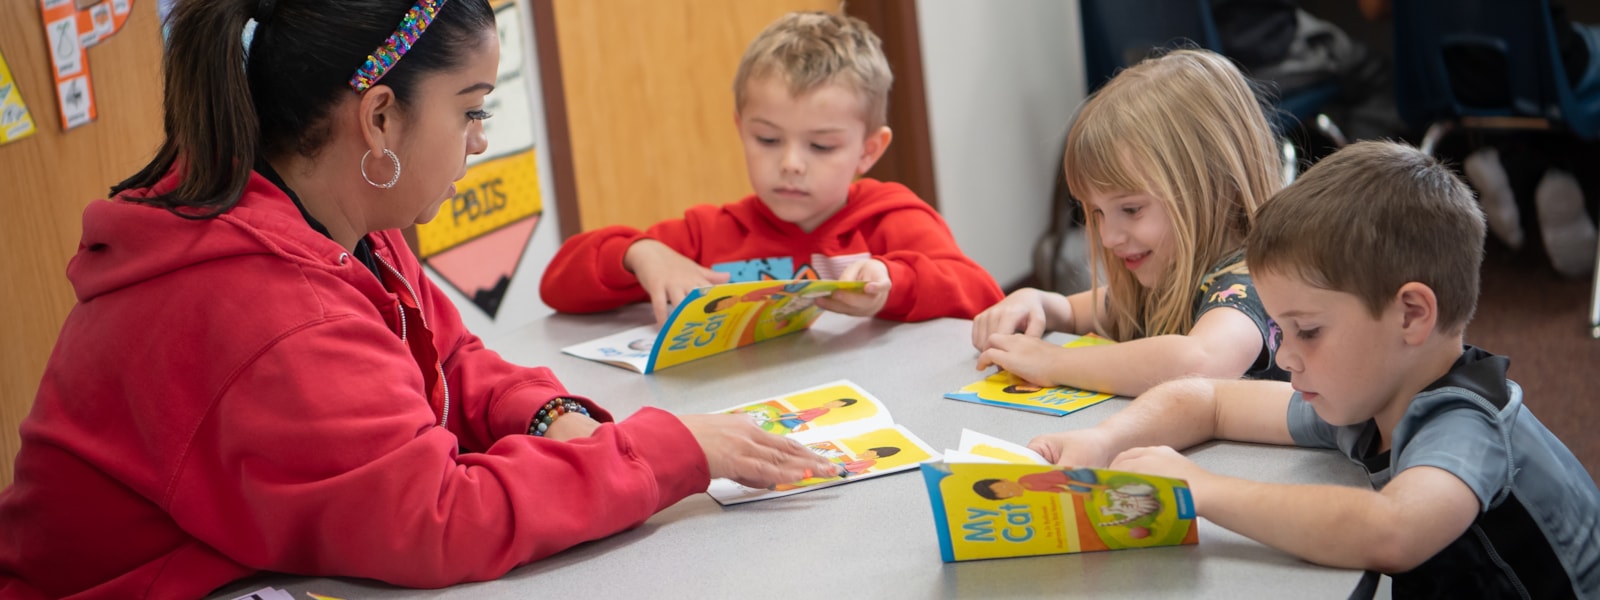 Kindergarten students learning how to read with a teacher